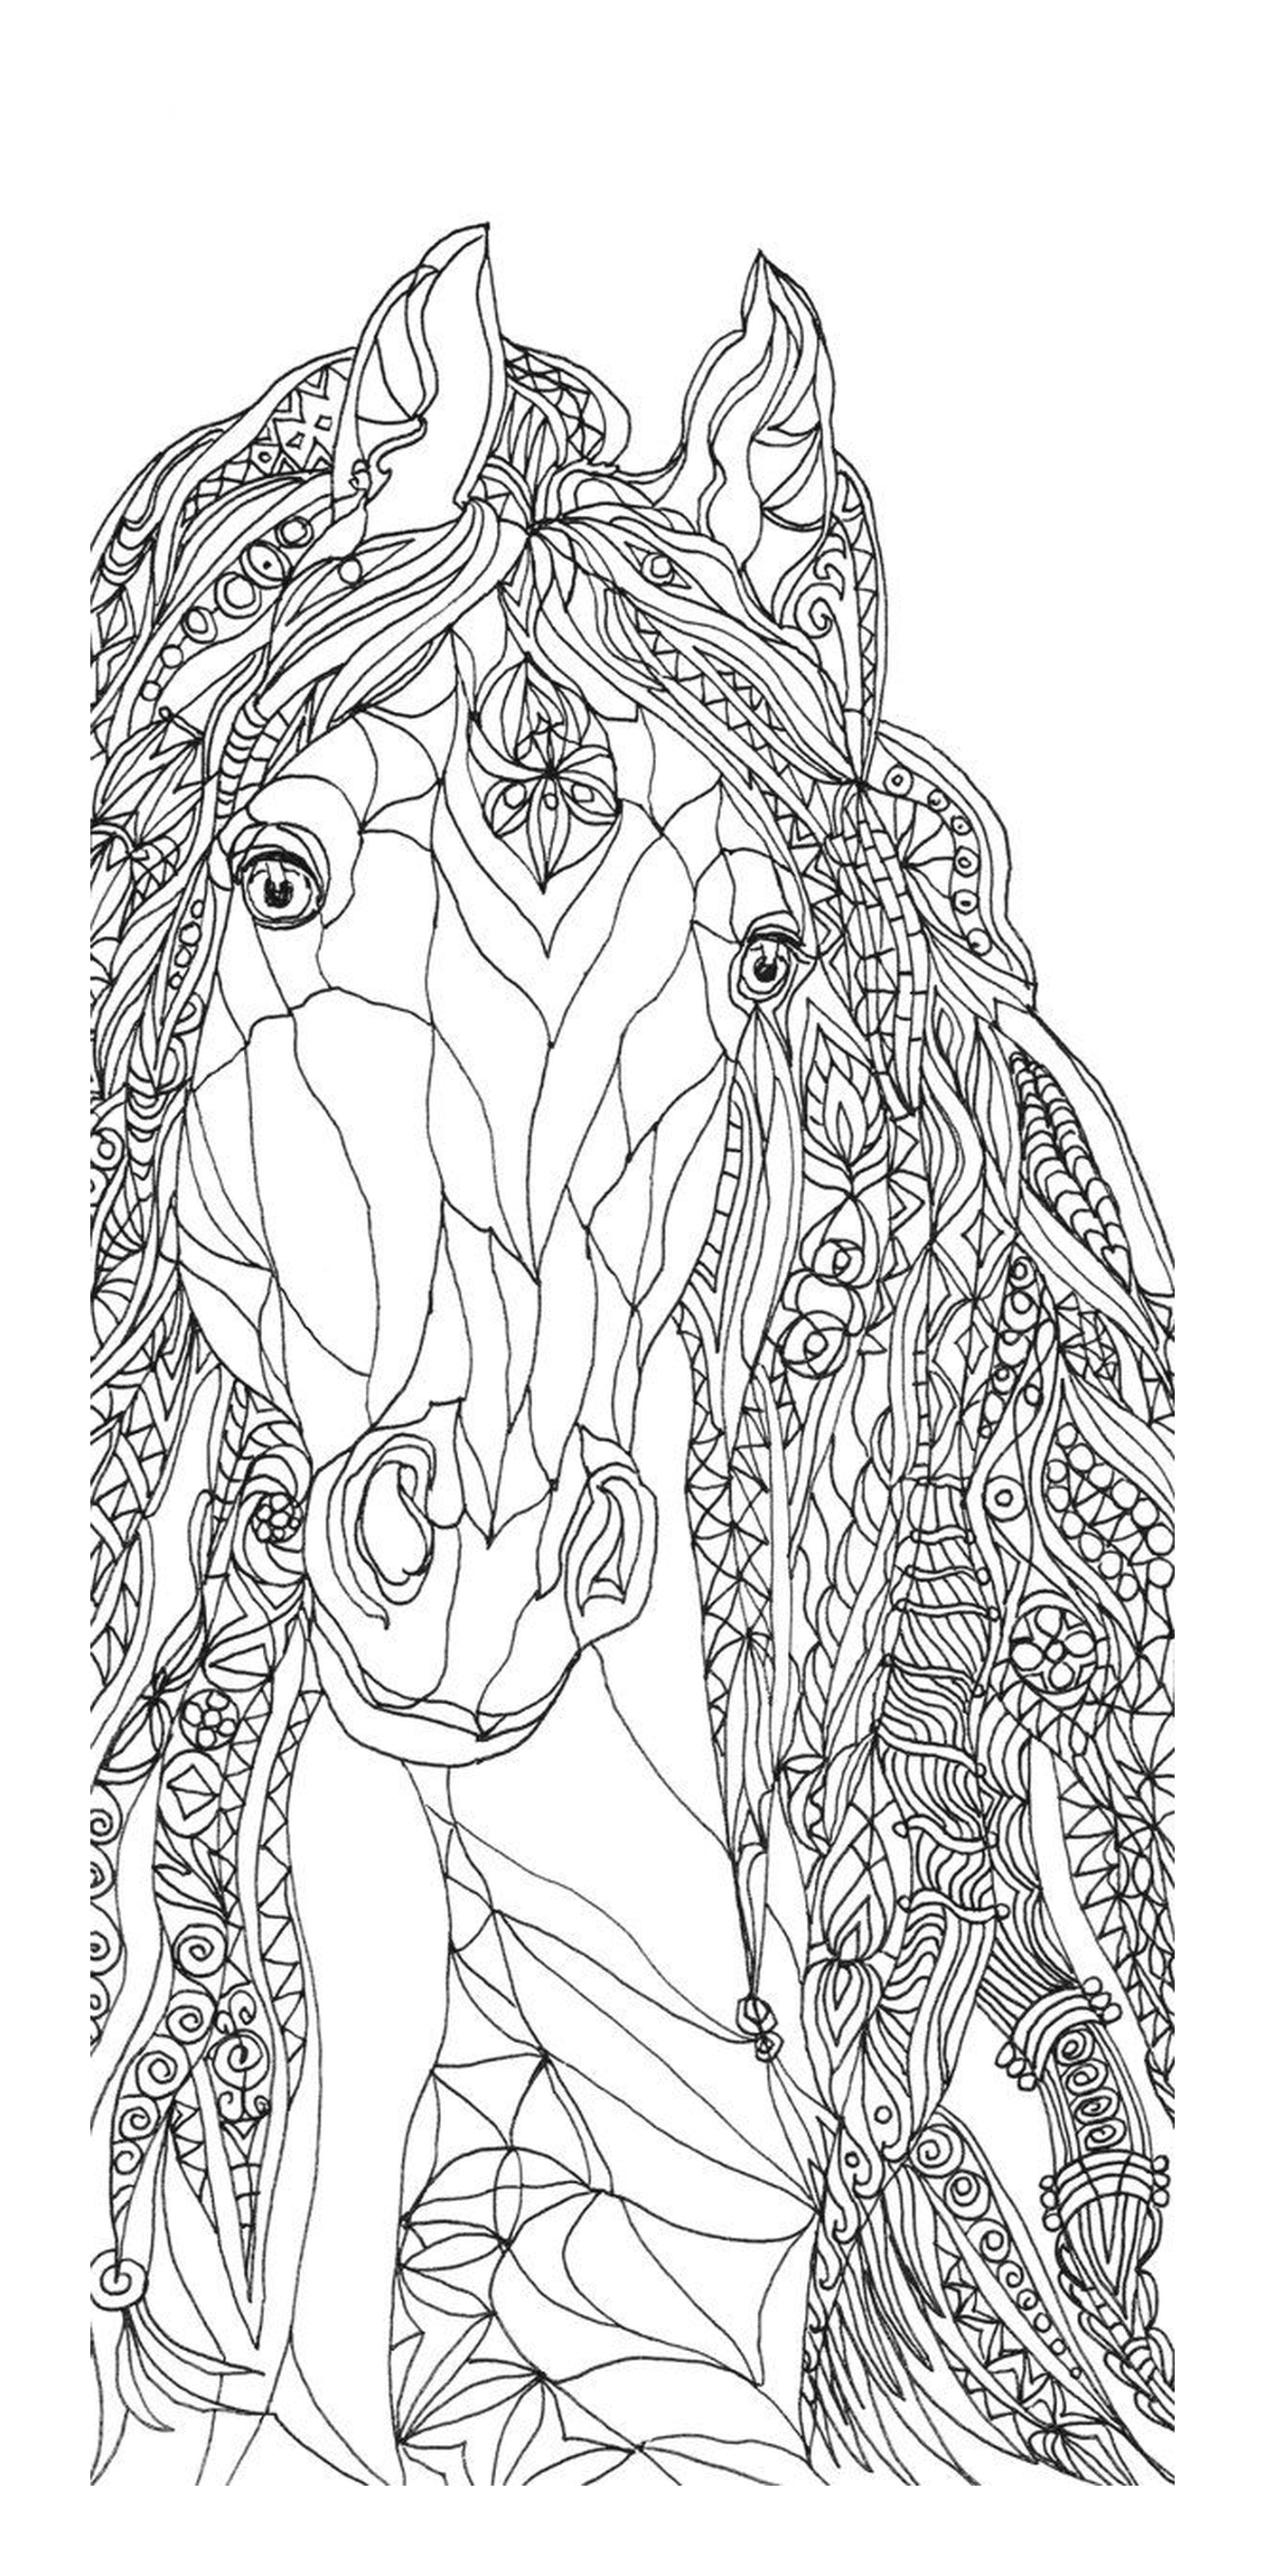  The head of a horse in a zentangle style 